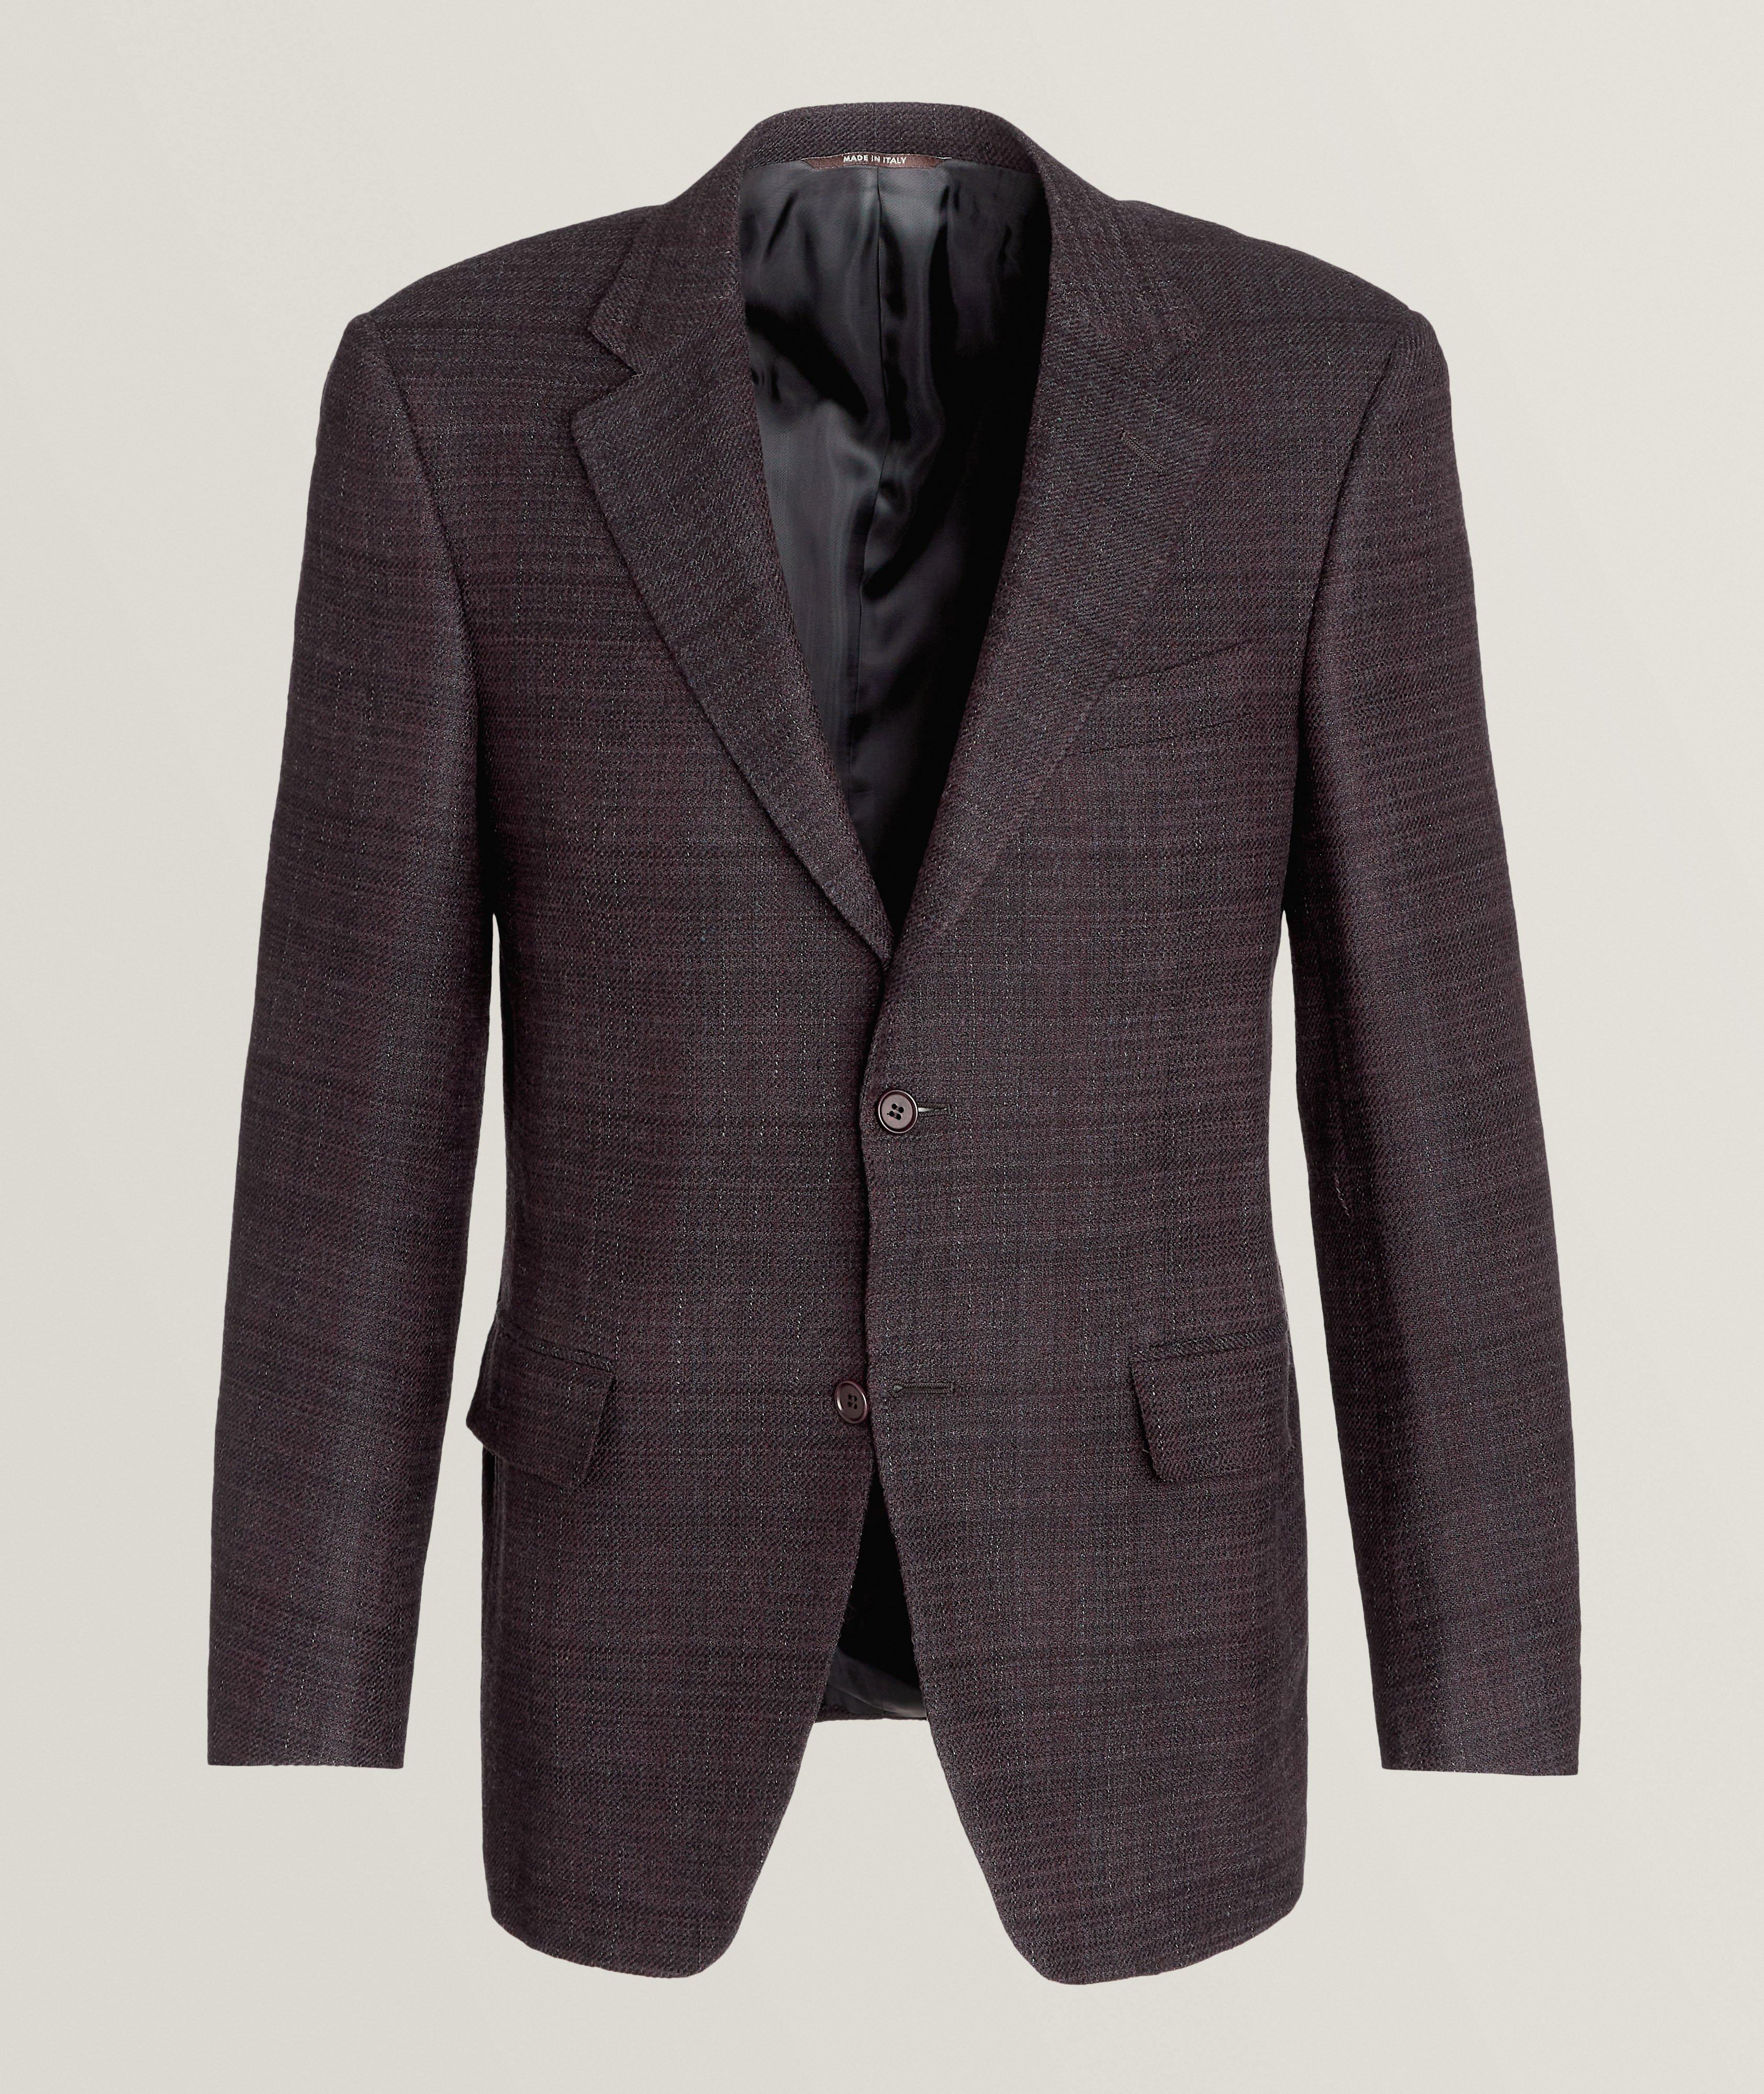 Textured Weave Stretch Wool-Cashmere Sport Jacket image 0